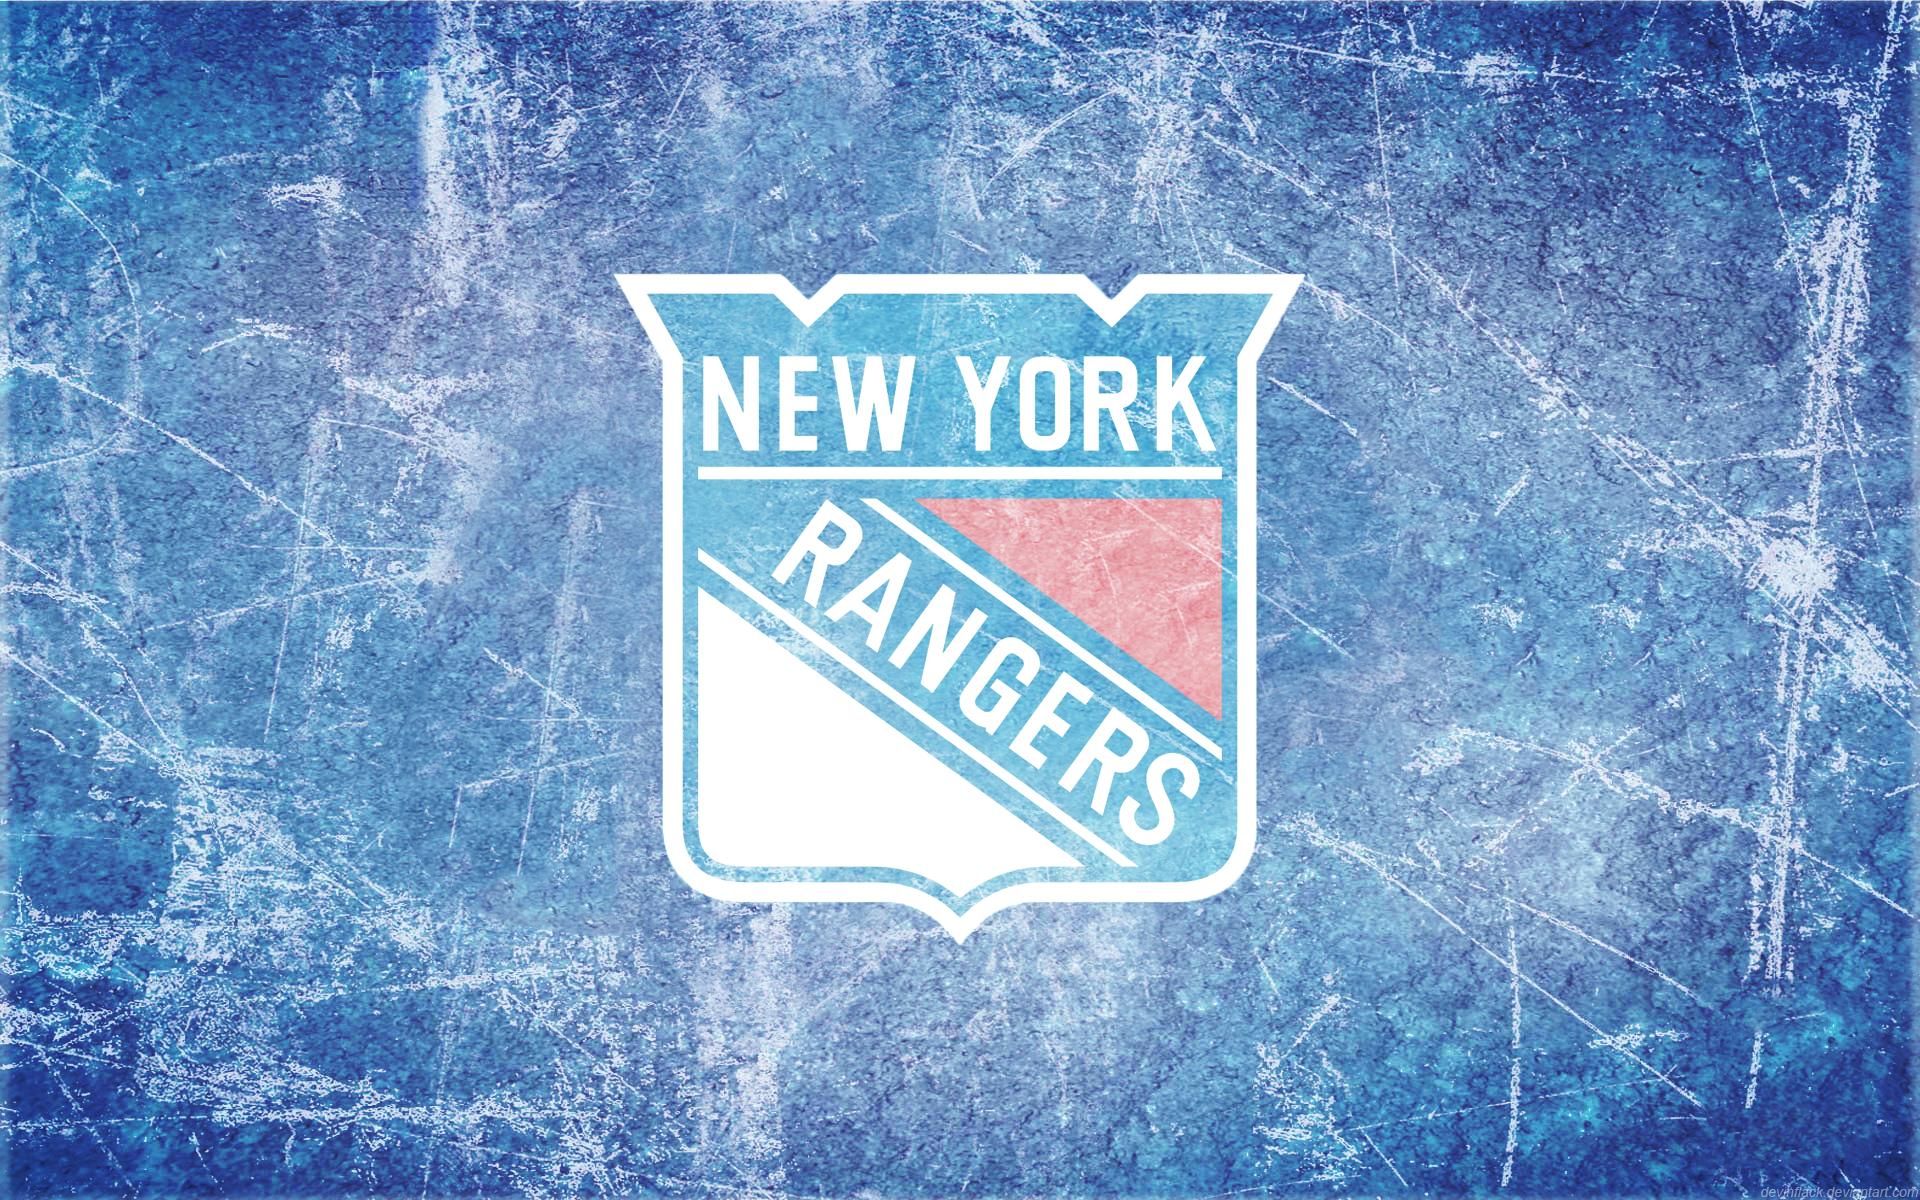 NY Rangers Backgrounds   iPhone Backgrounds New